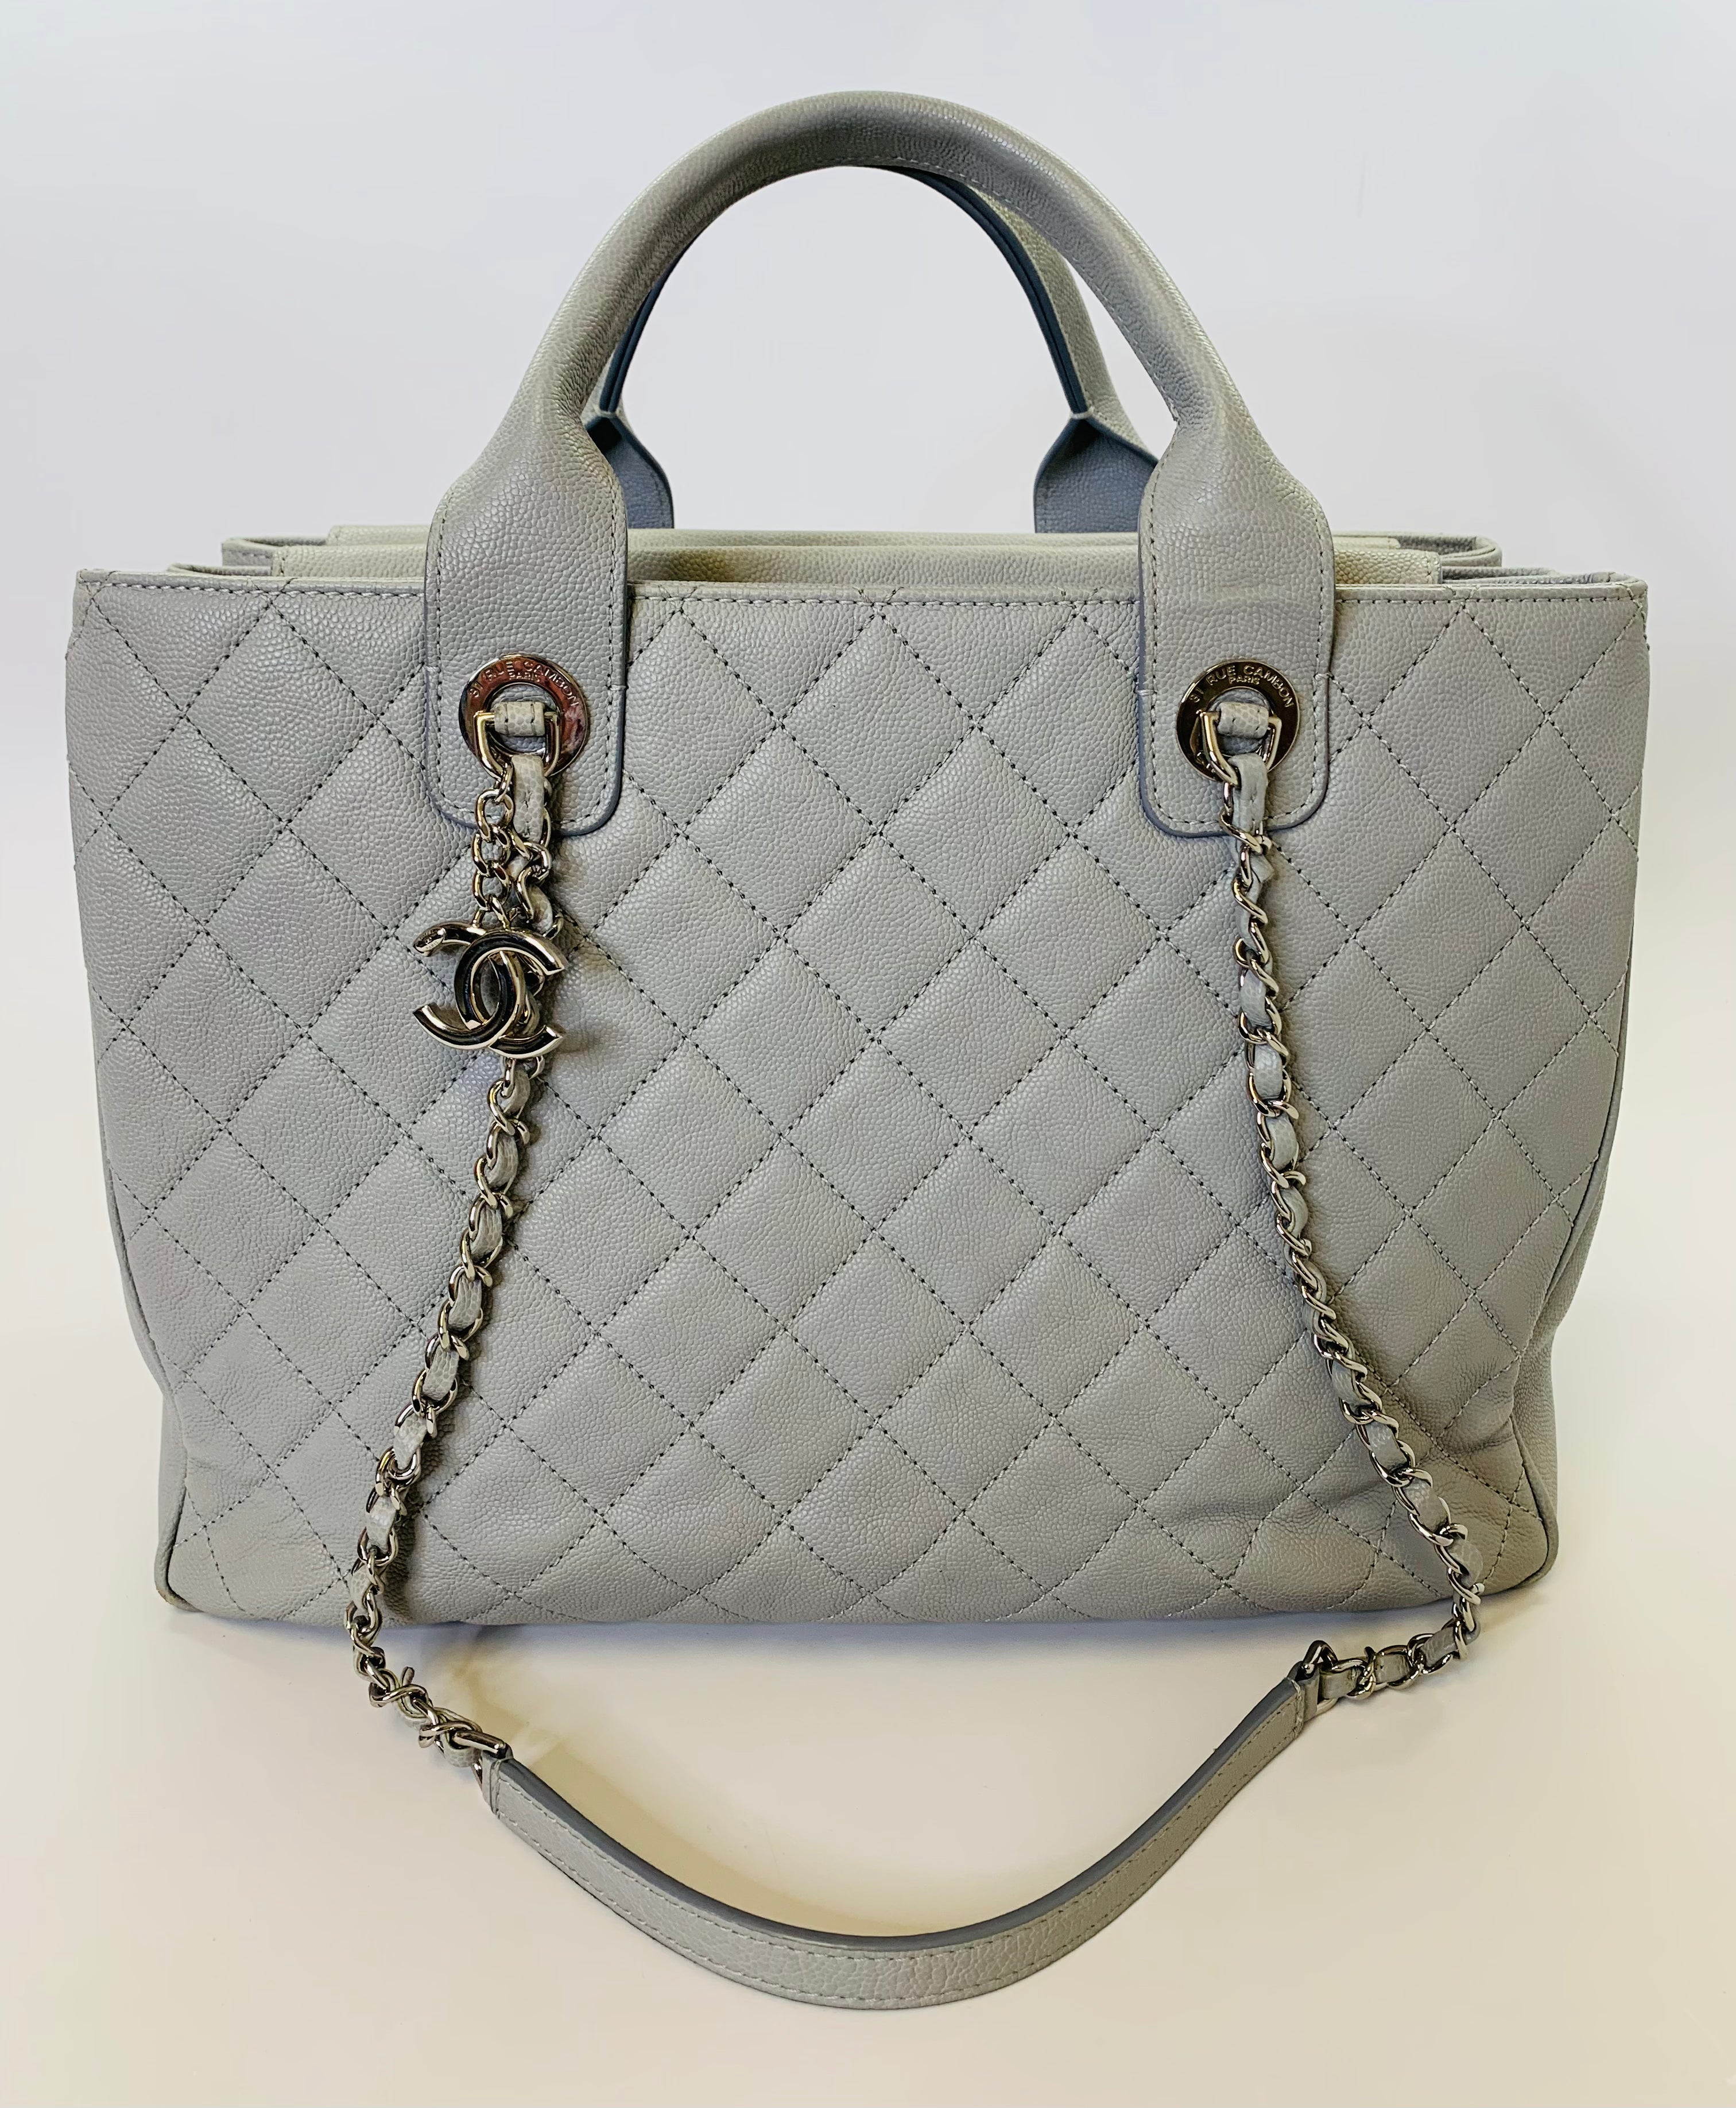 CHANEL Caviar Studded Small Deauville Tote Grey 637730